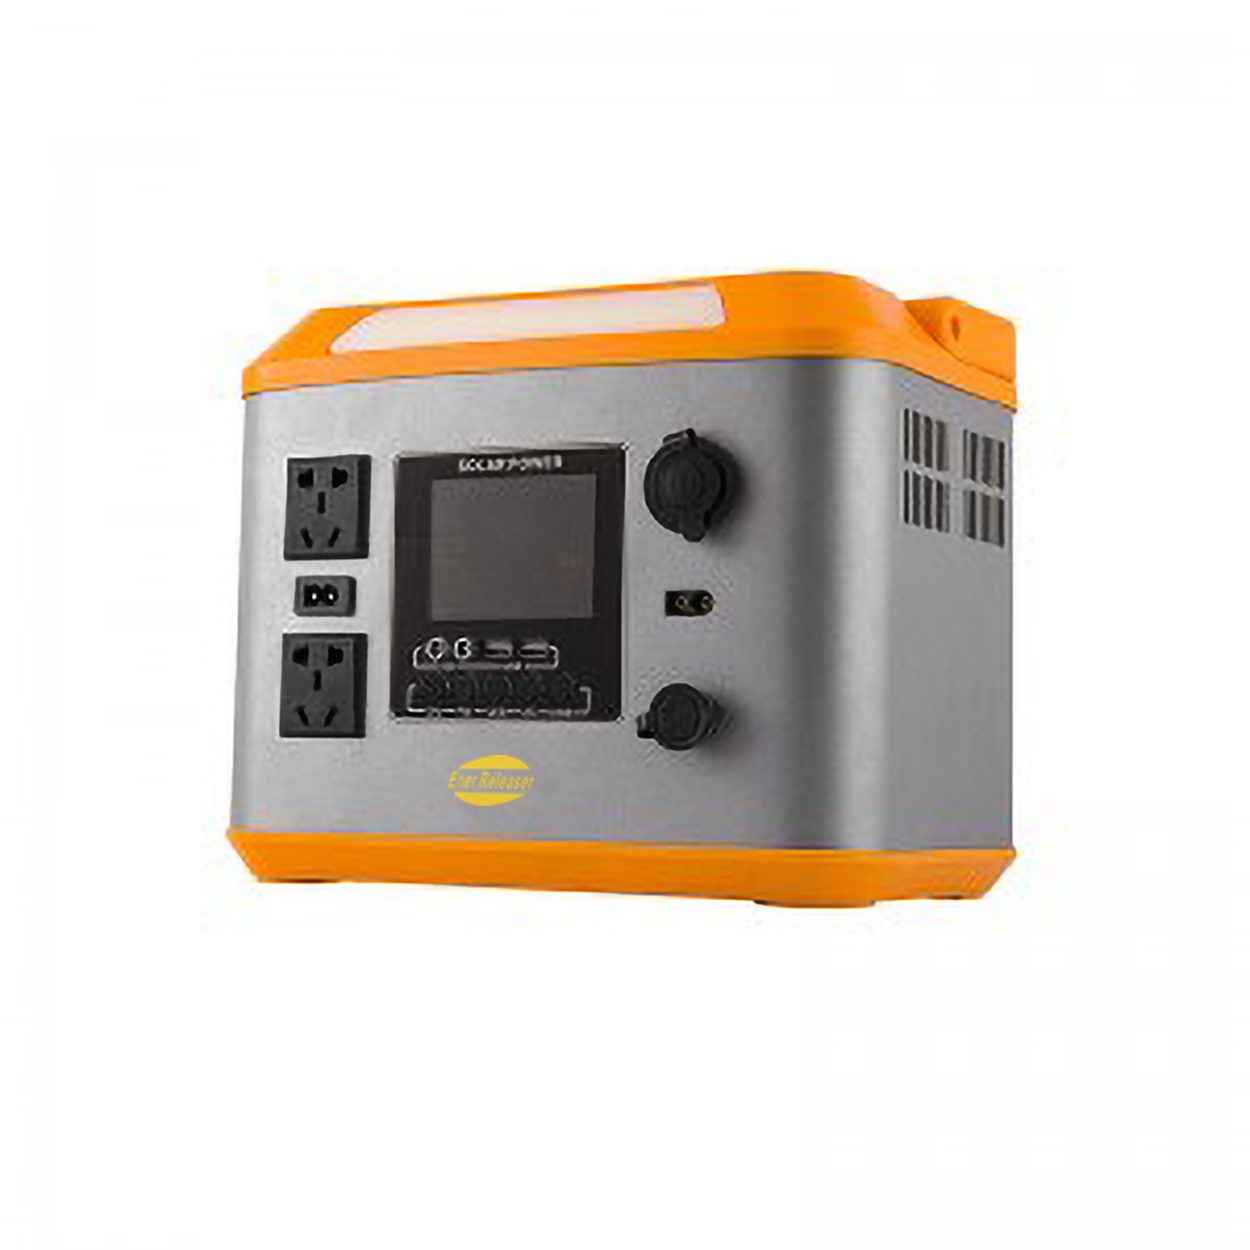 Jackery Solar Generator 2000 Plus launches as brand-first up-to-6,000W portable power solution - NotebookCheck.net News